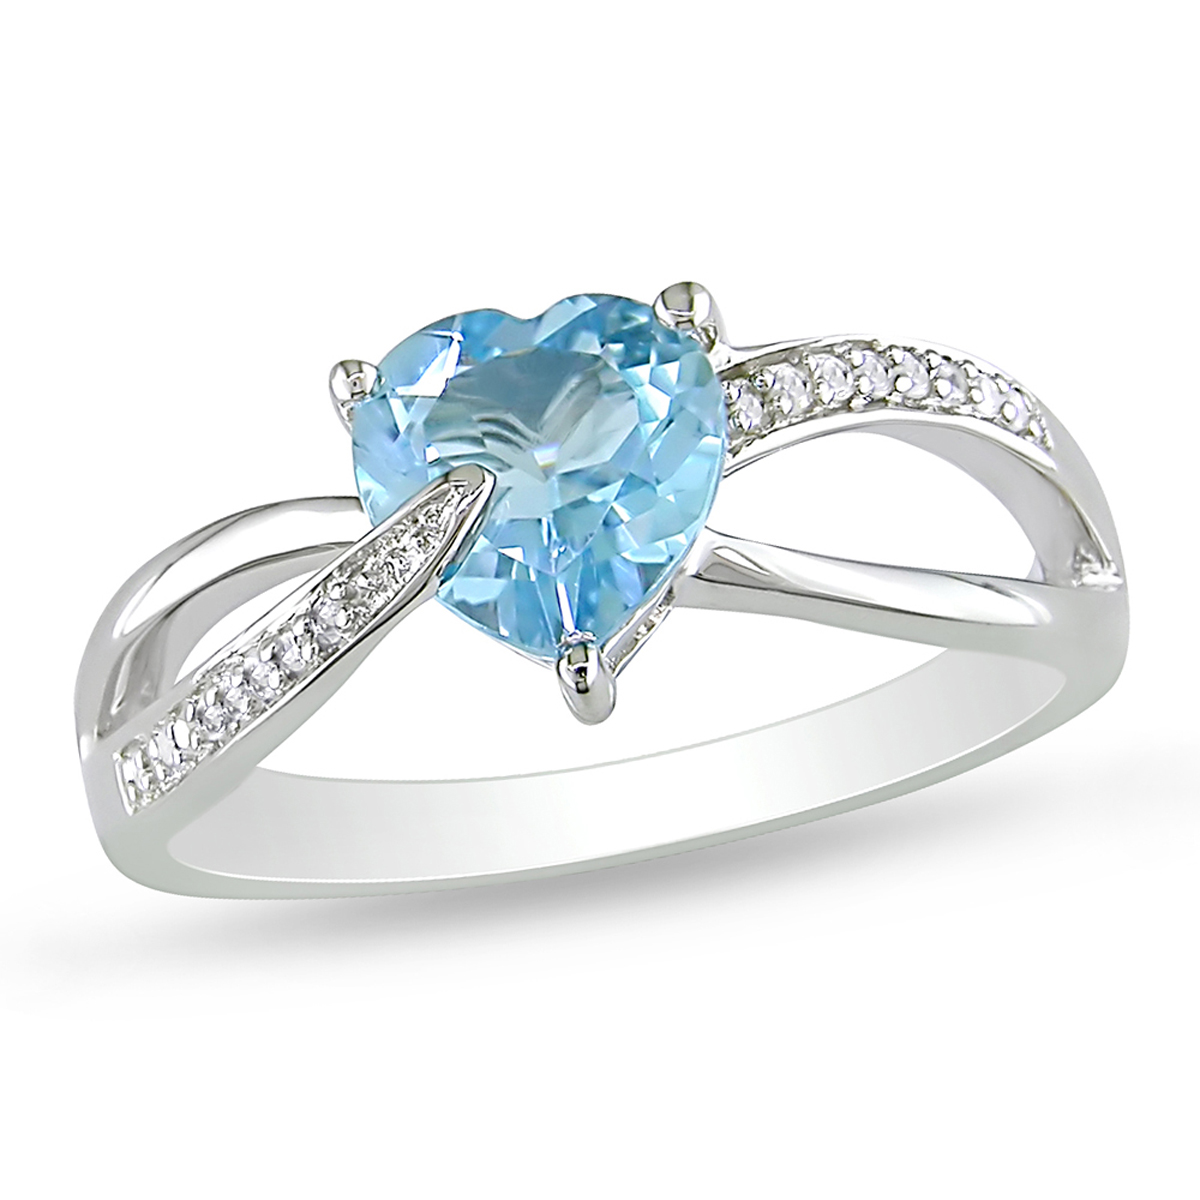 Amour 0.05 Carat T.W. Diamond and 1 1/3 Carat T.G.W. Blue Topaz Fashion Ring in Sterling Silver GH I3